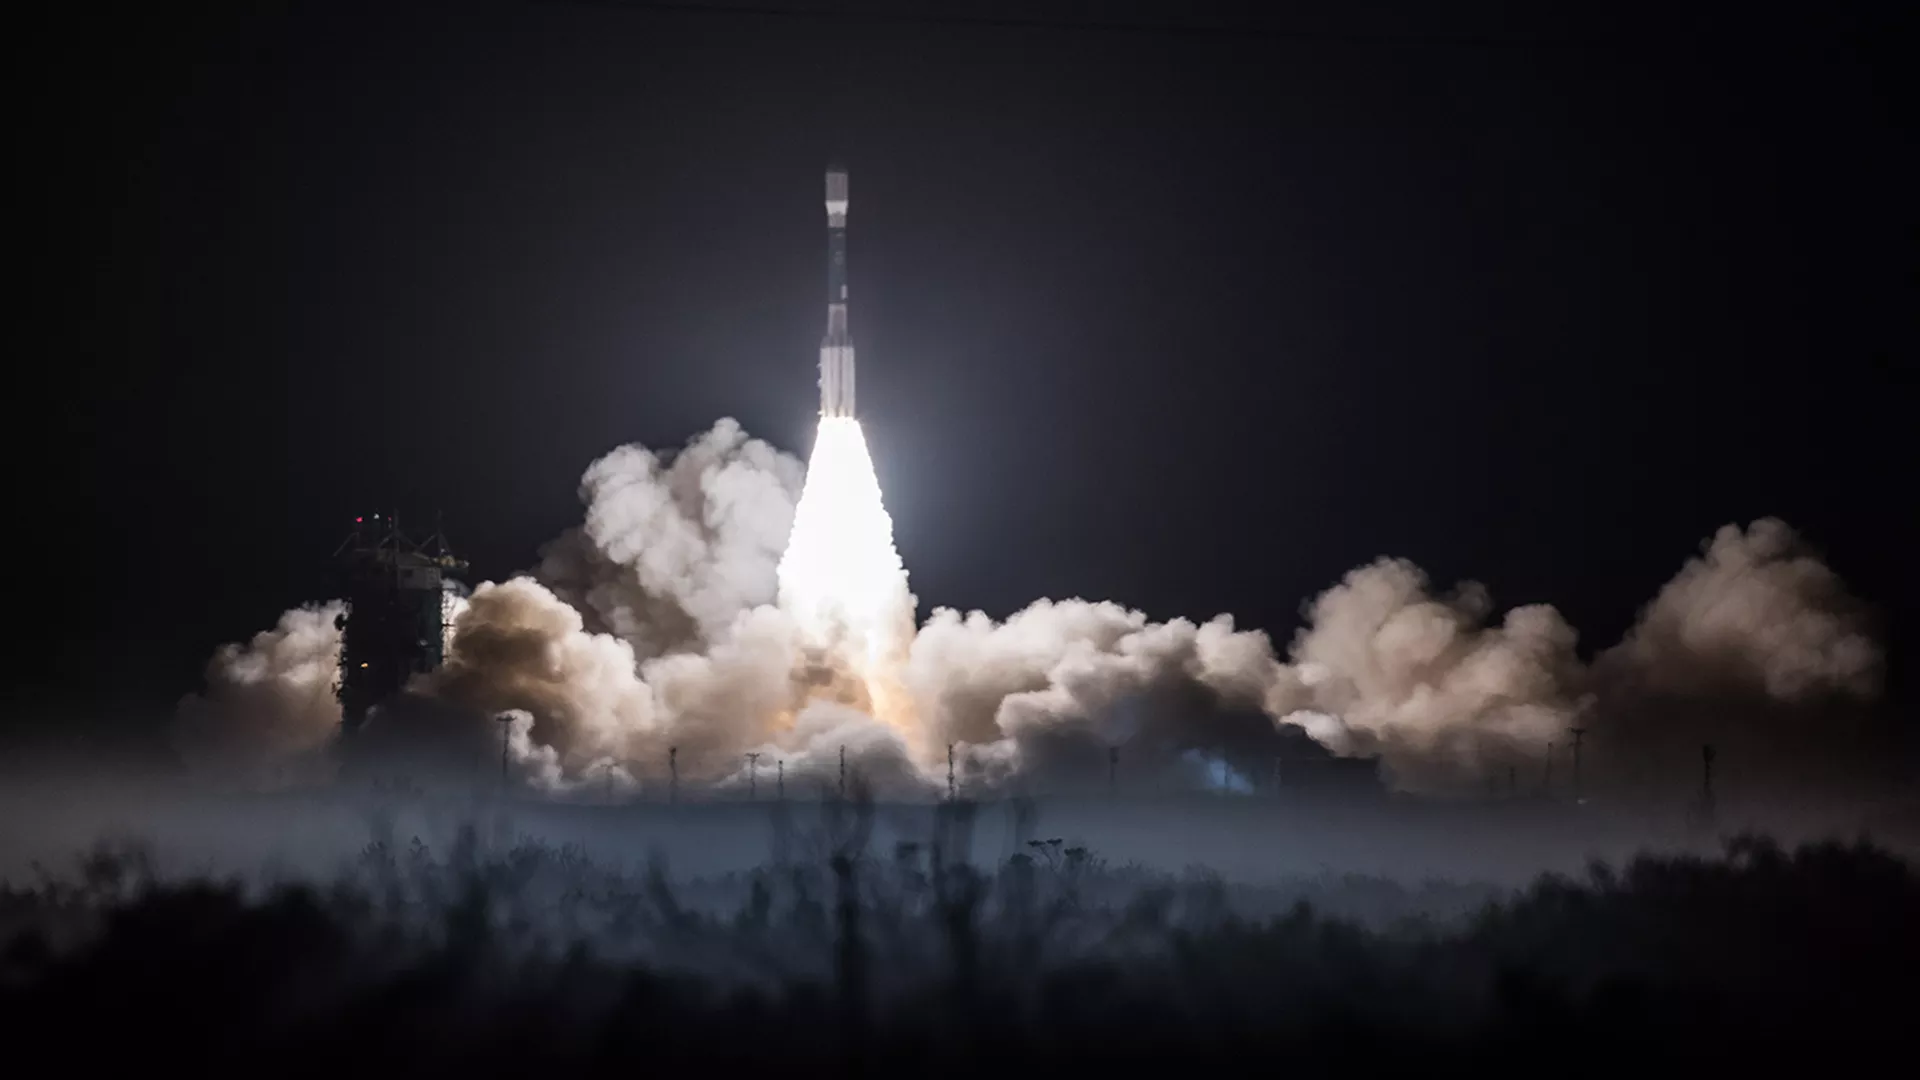 Image of the JPSS-1 Rocket Lift Off.